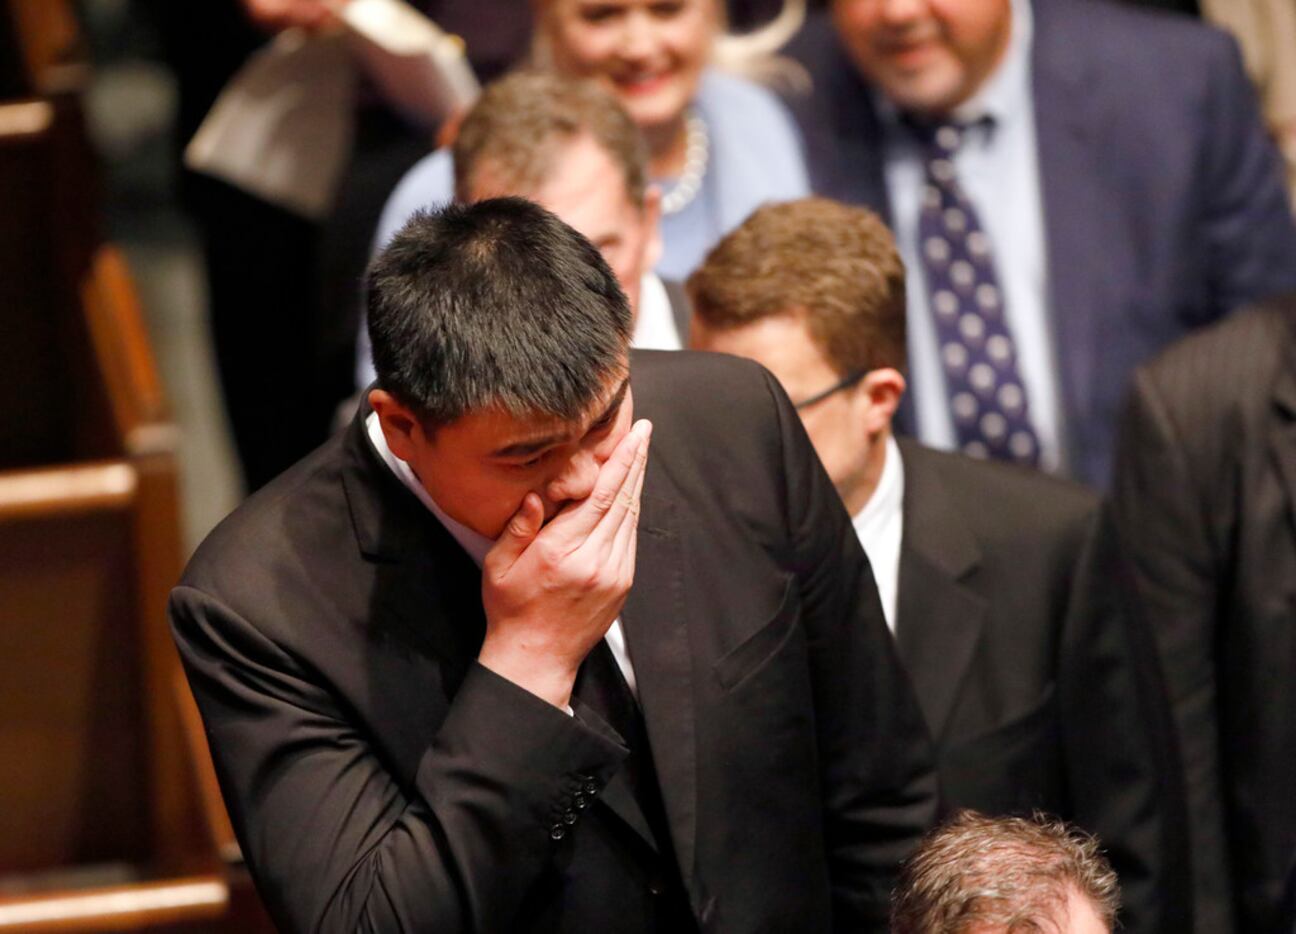 Former Houston Rockets center Yao Ming leaves the funeral service for George H.W. Bush.